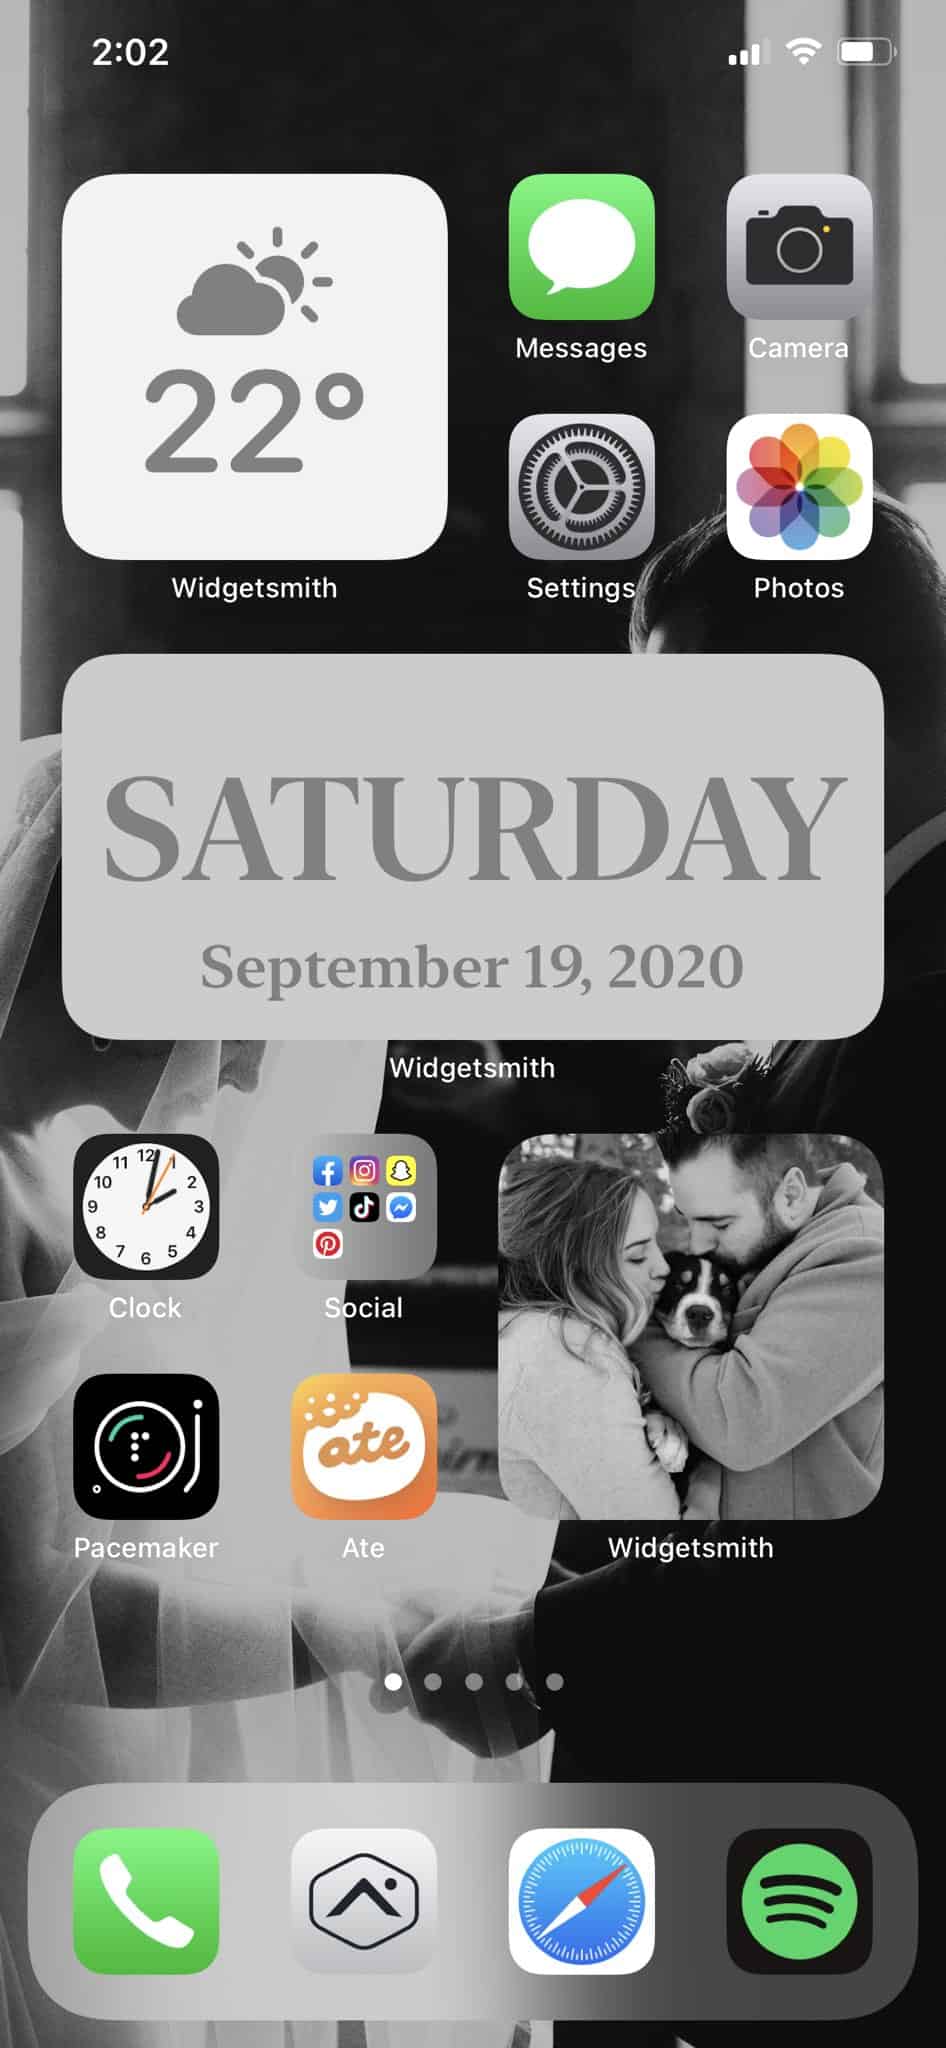 iOS 14 Aesthetic Home Screen Ideas for iPhone - All Things How